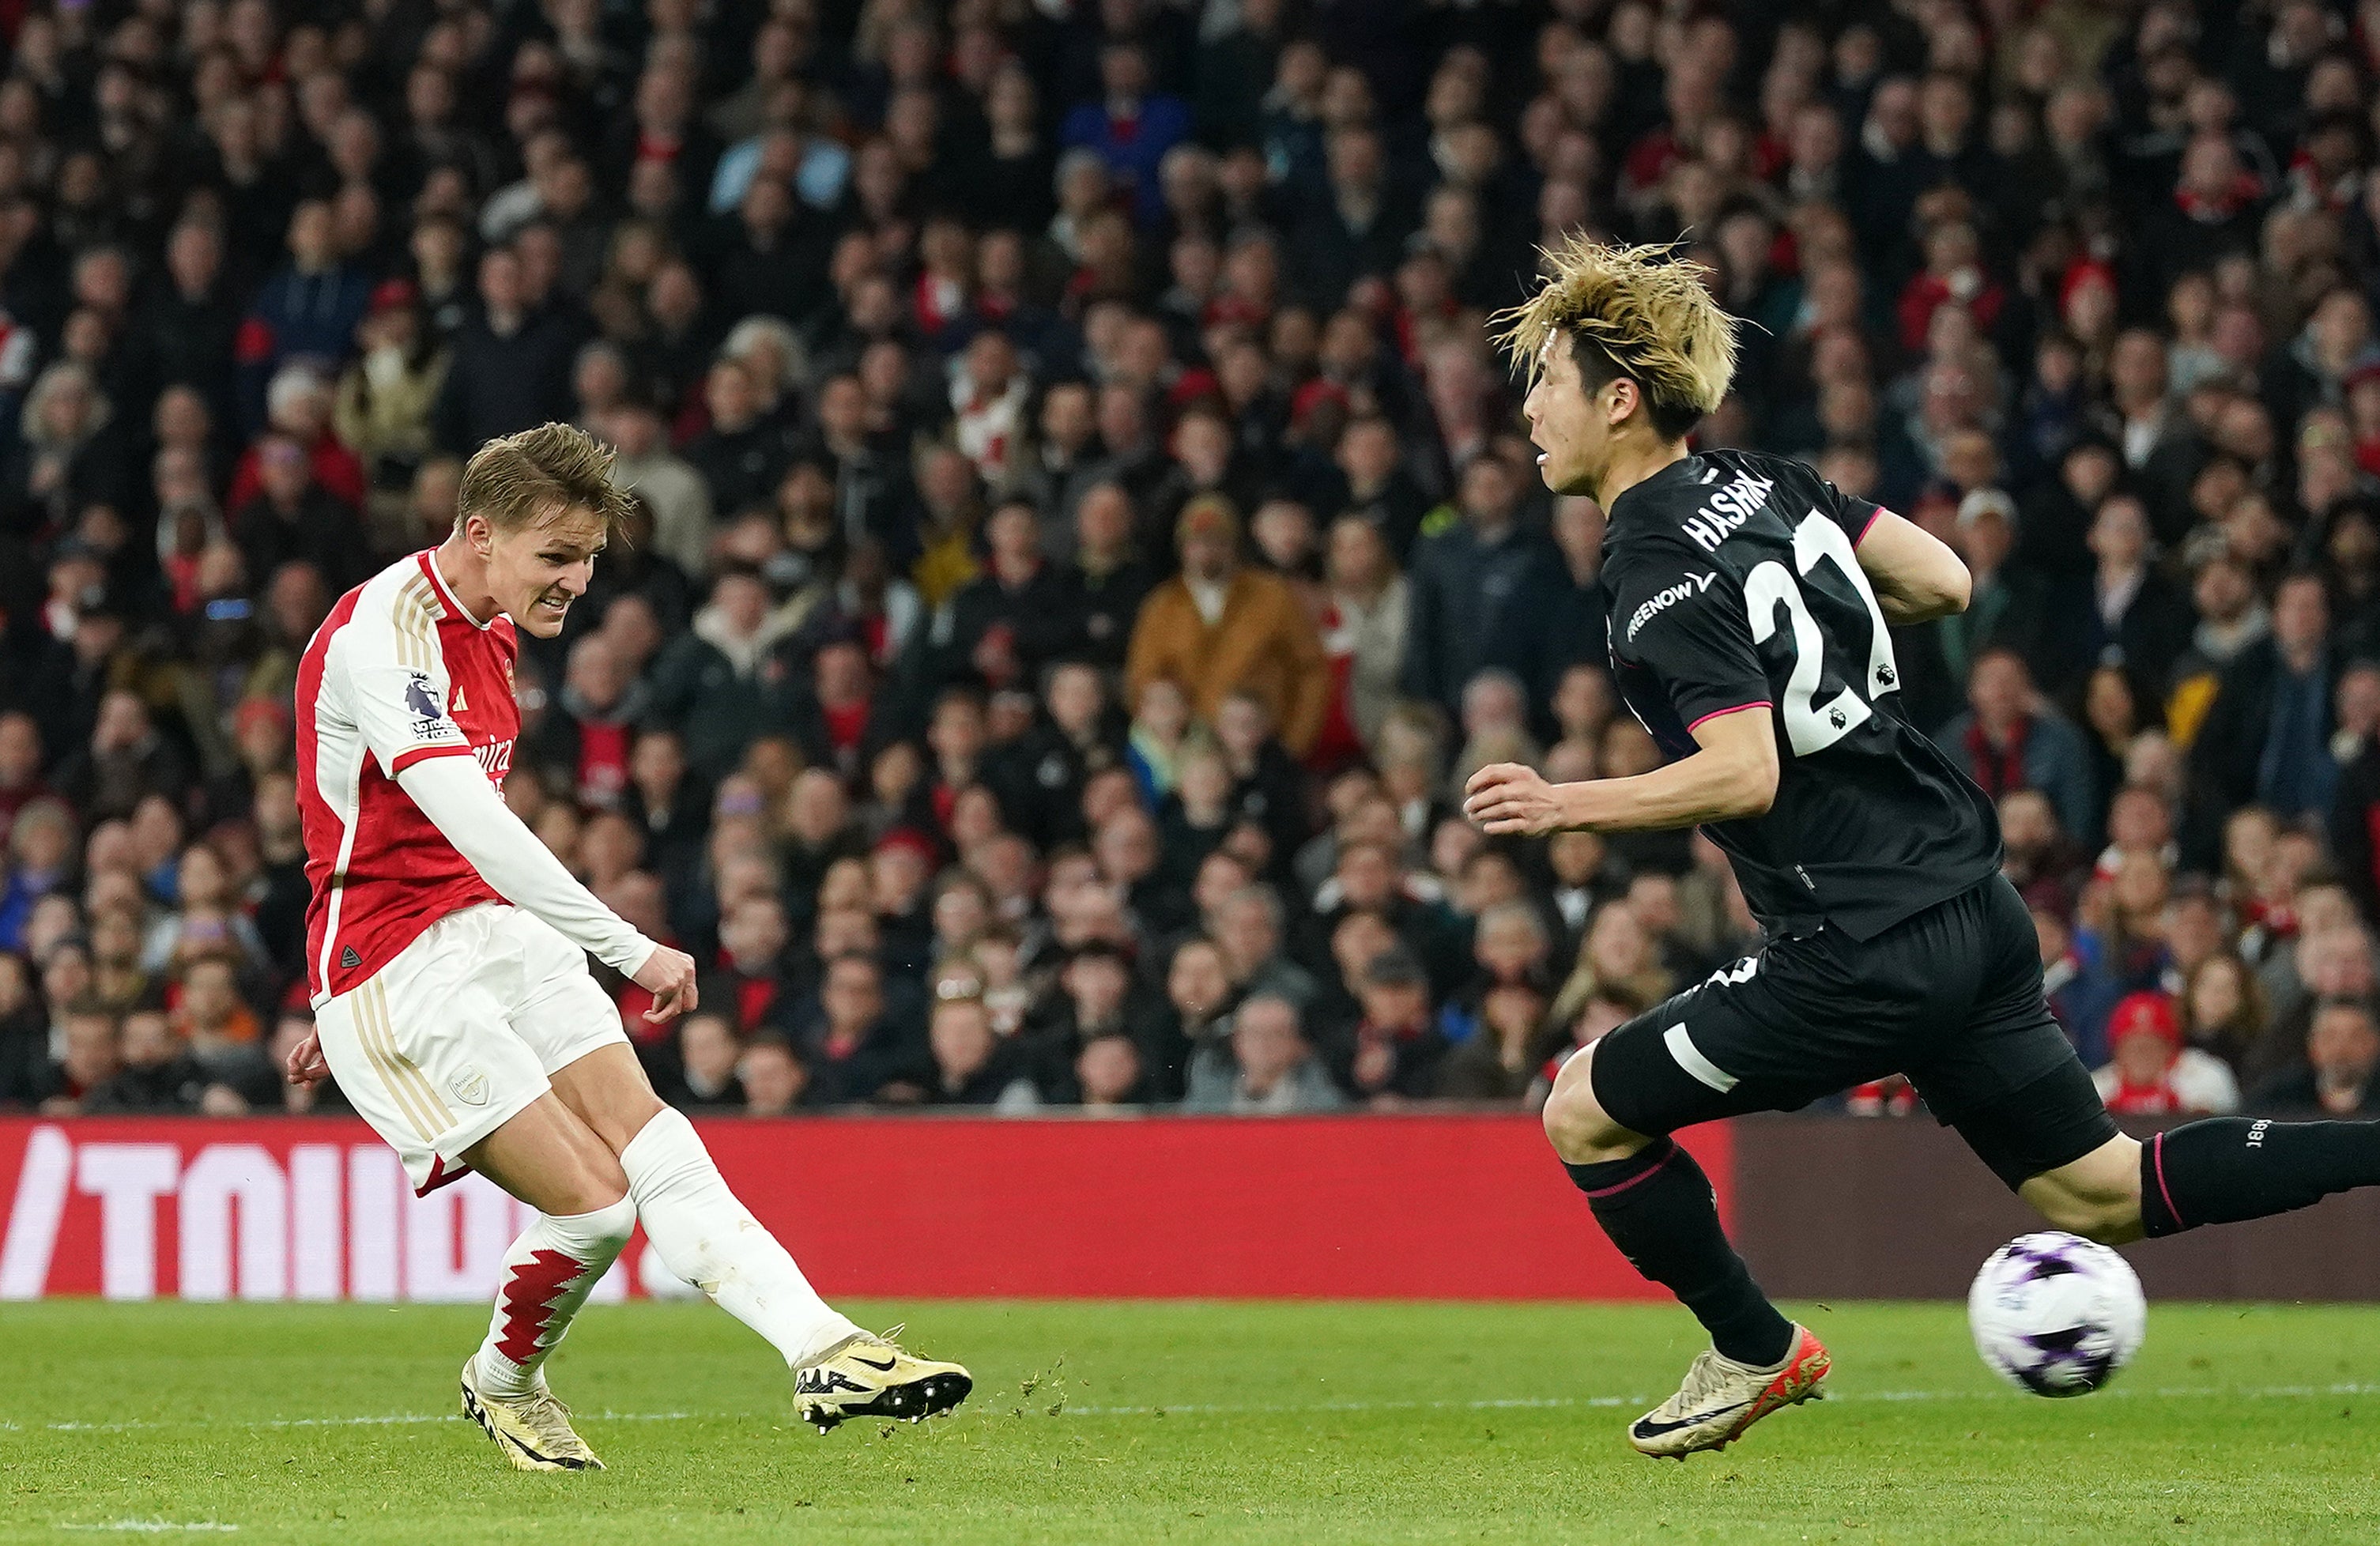 Odegaard’s finish gave Arsenal an unassailable lead